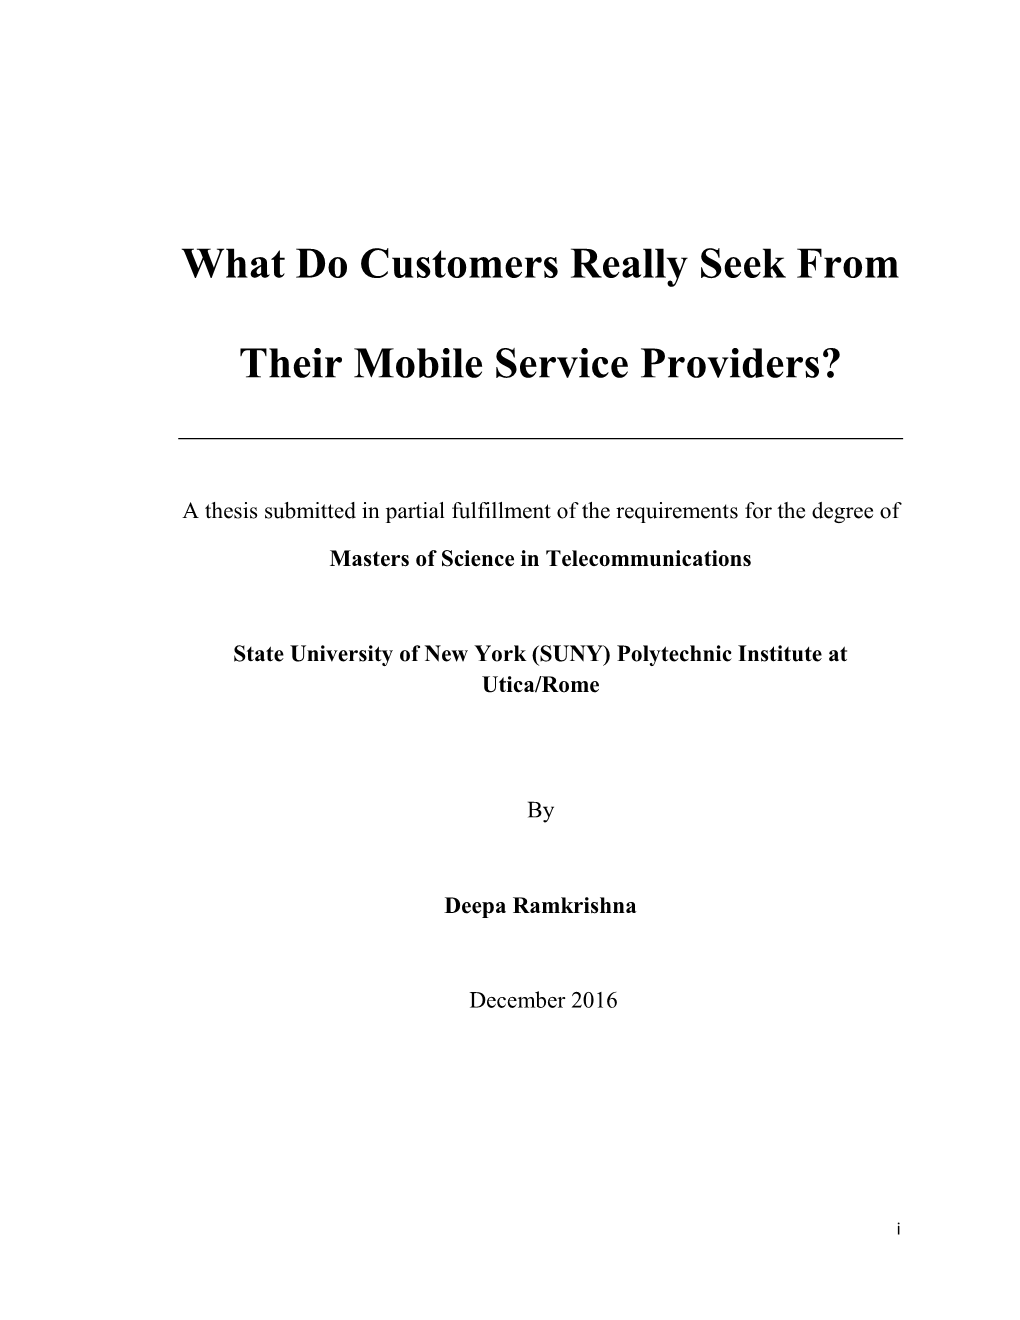 What Do Customers Really Seek from Their Mobile Service Providers?